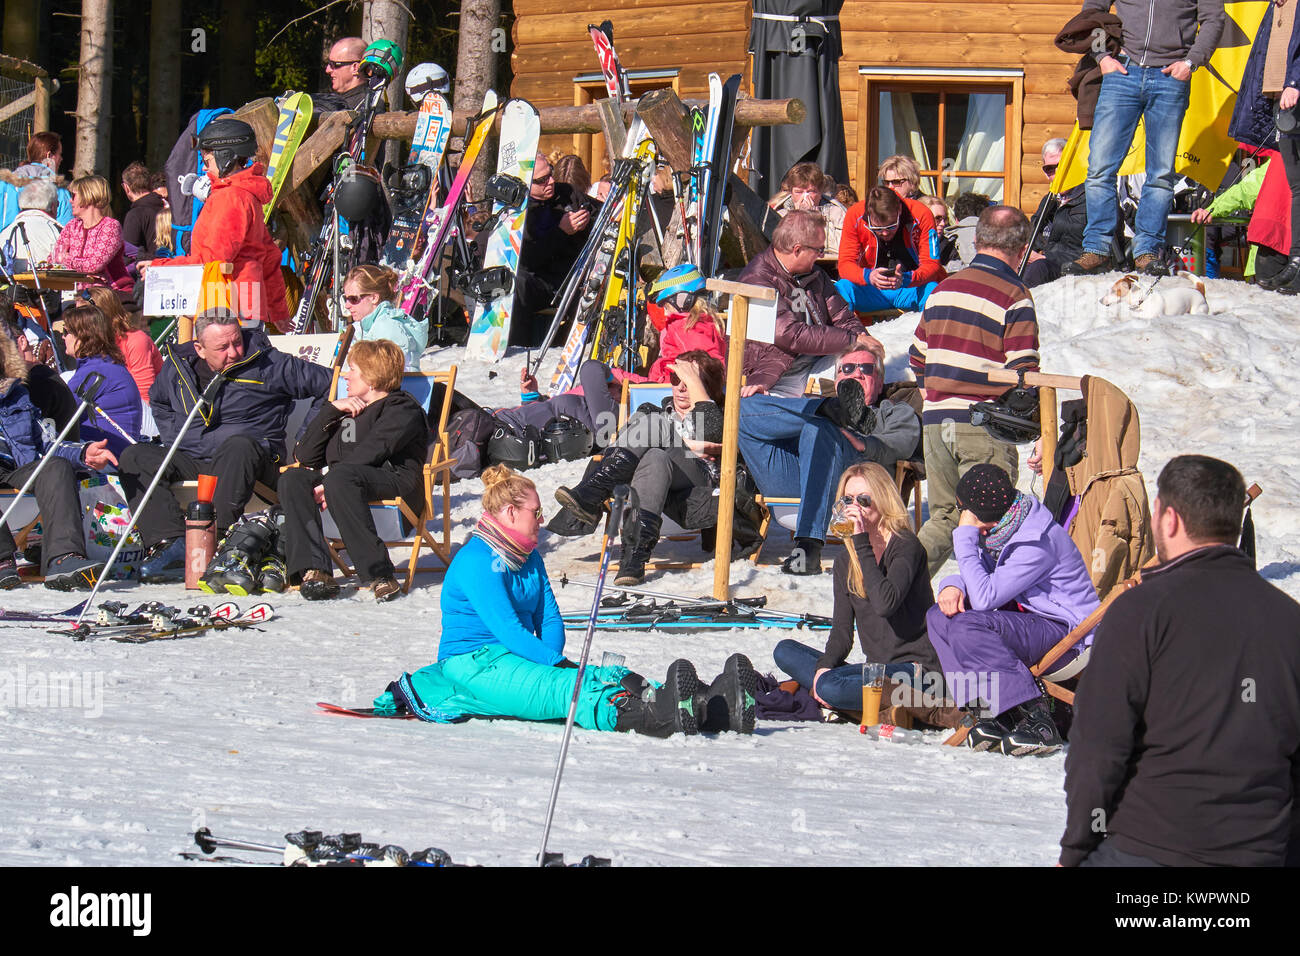 WINTERBERG, GERMANY - FEBRUARY 15, 2017: People sitting, drinking and relaxing  at Ski Carousel Winterberg Stock Photo